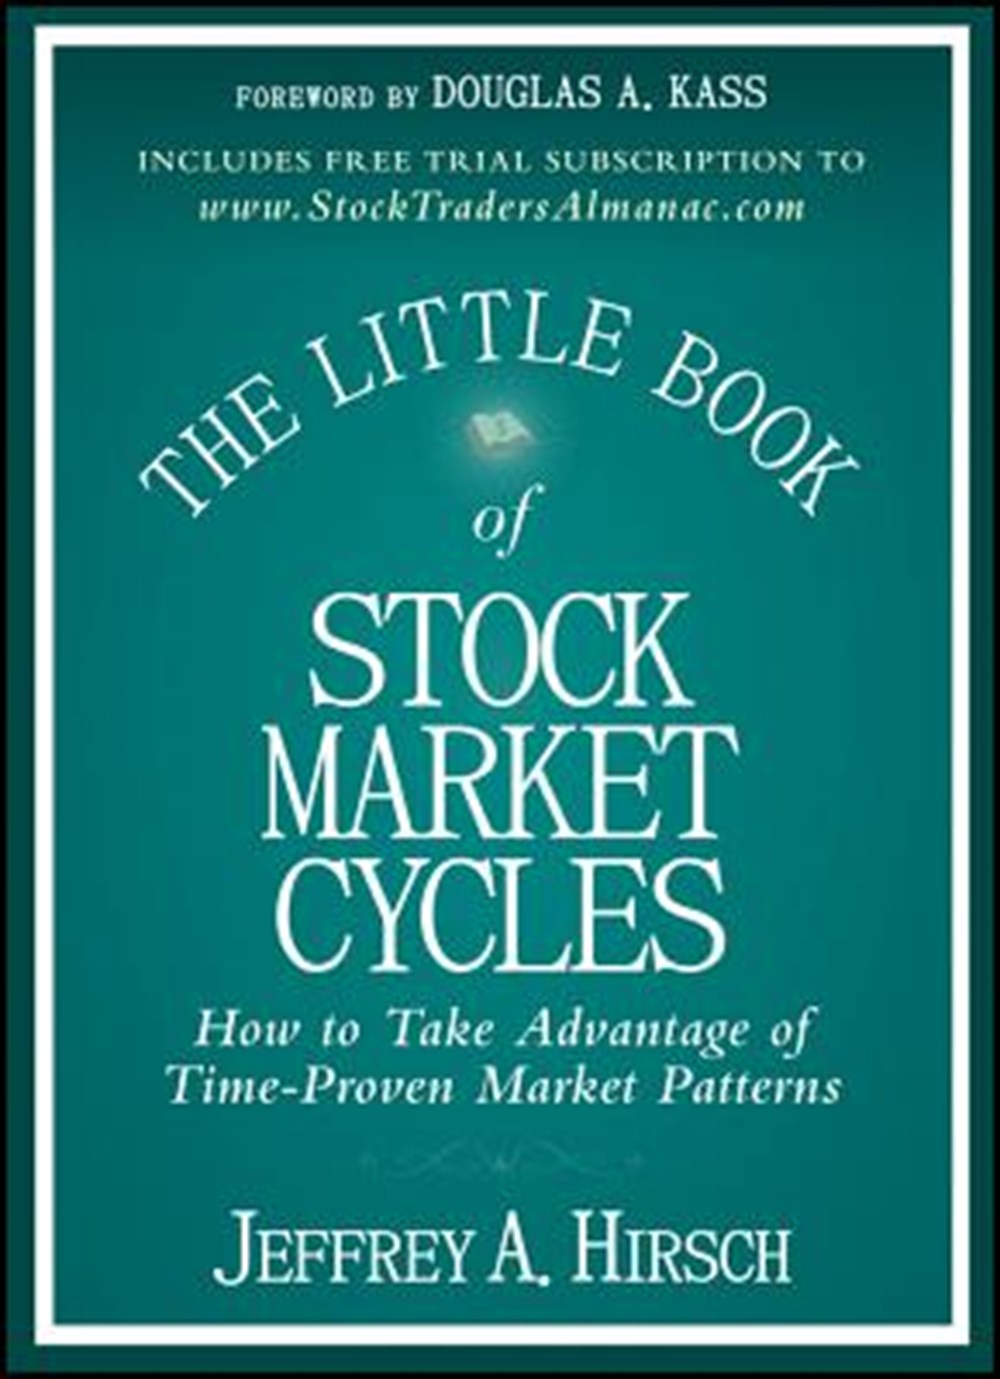 Little Book of Stock Market Cycles How to Take Advantage of Time-Proven Market Patterns